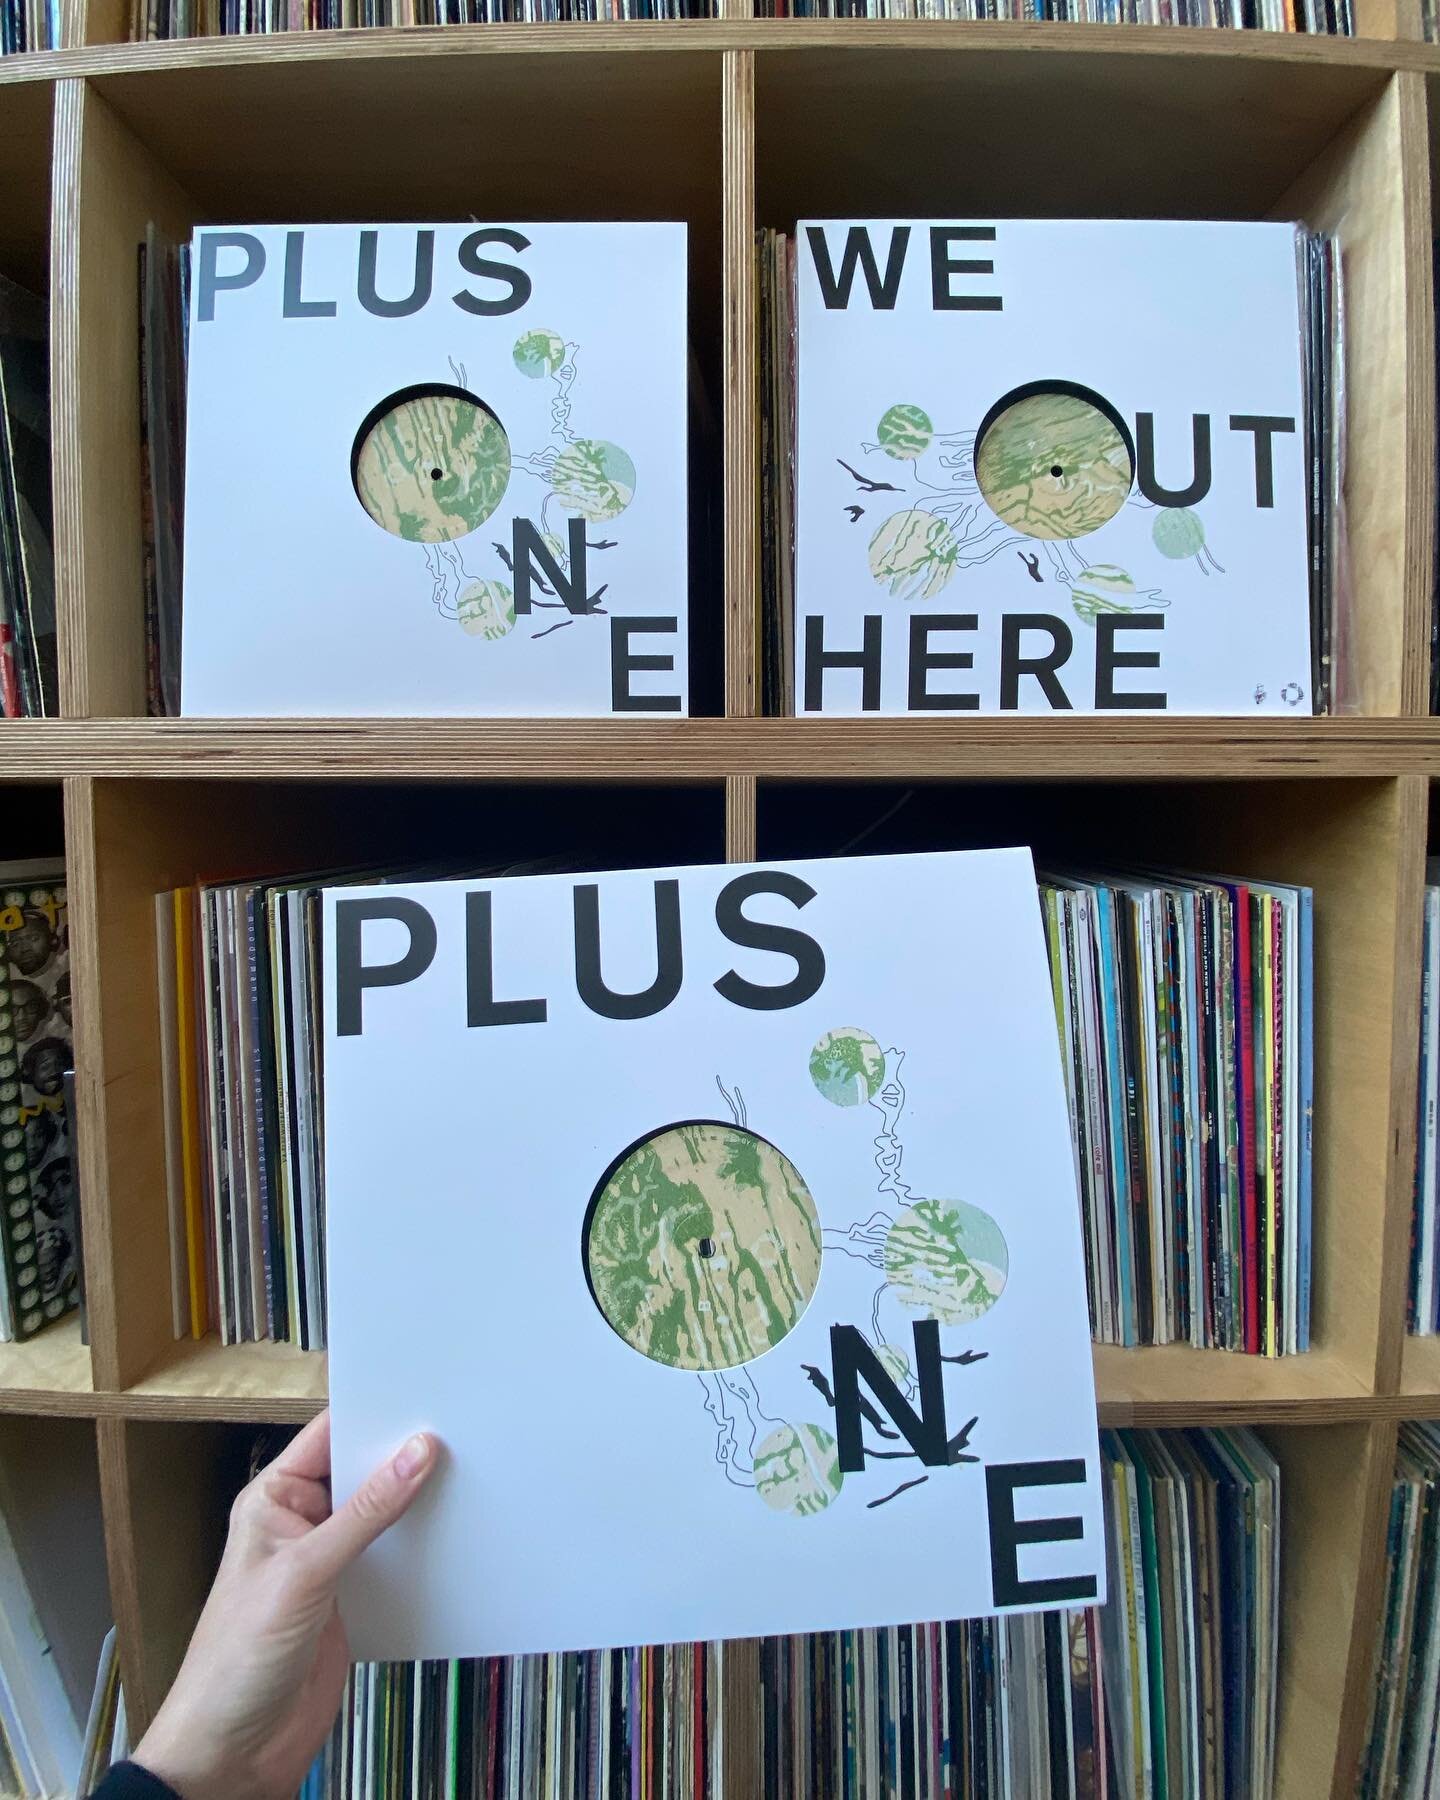 We Out Here is the highly anticipated debut EP from Dublin&rsquo;s @__plus__one__ on First Second Label. The prolific musical polymath lays down 4 sub-wrenching club tracks indebted to hardcore futurism with a canny pop sensibility. 

Plus One is an 